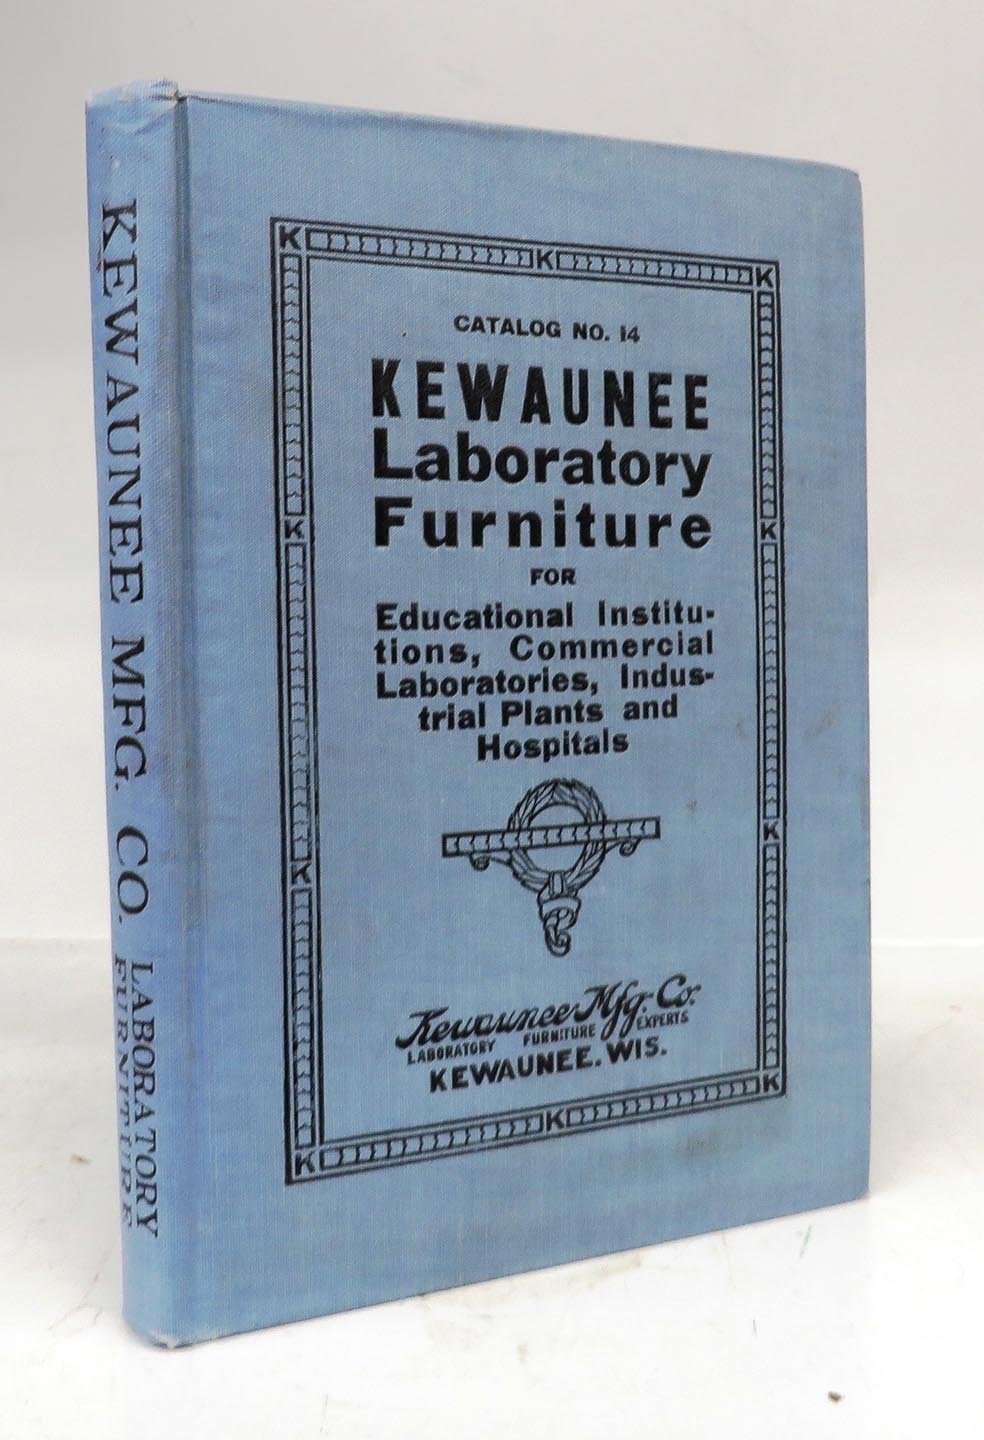 Catalog No. 14. Kewaunee Laboratory Furniture for Educational Institutions, Commercial Laboratories, Industrial Plants and Hospitals